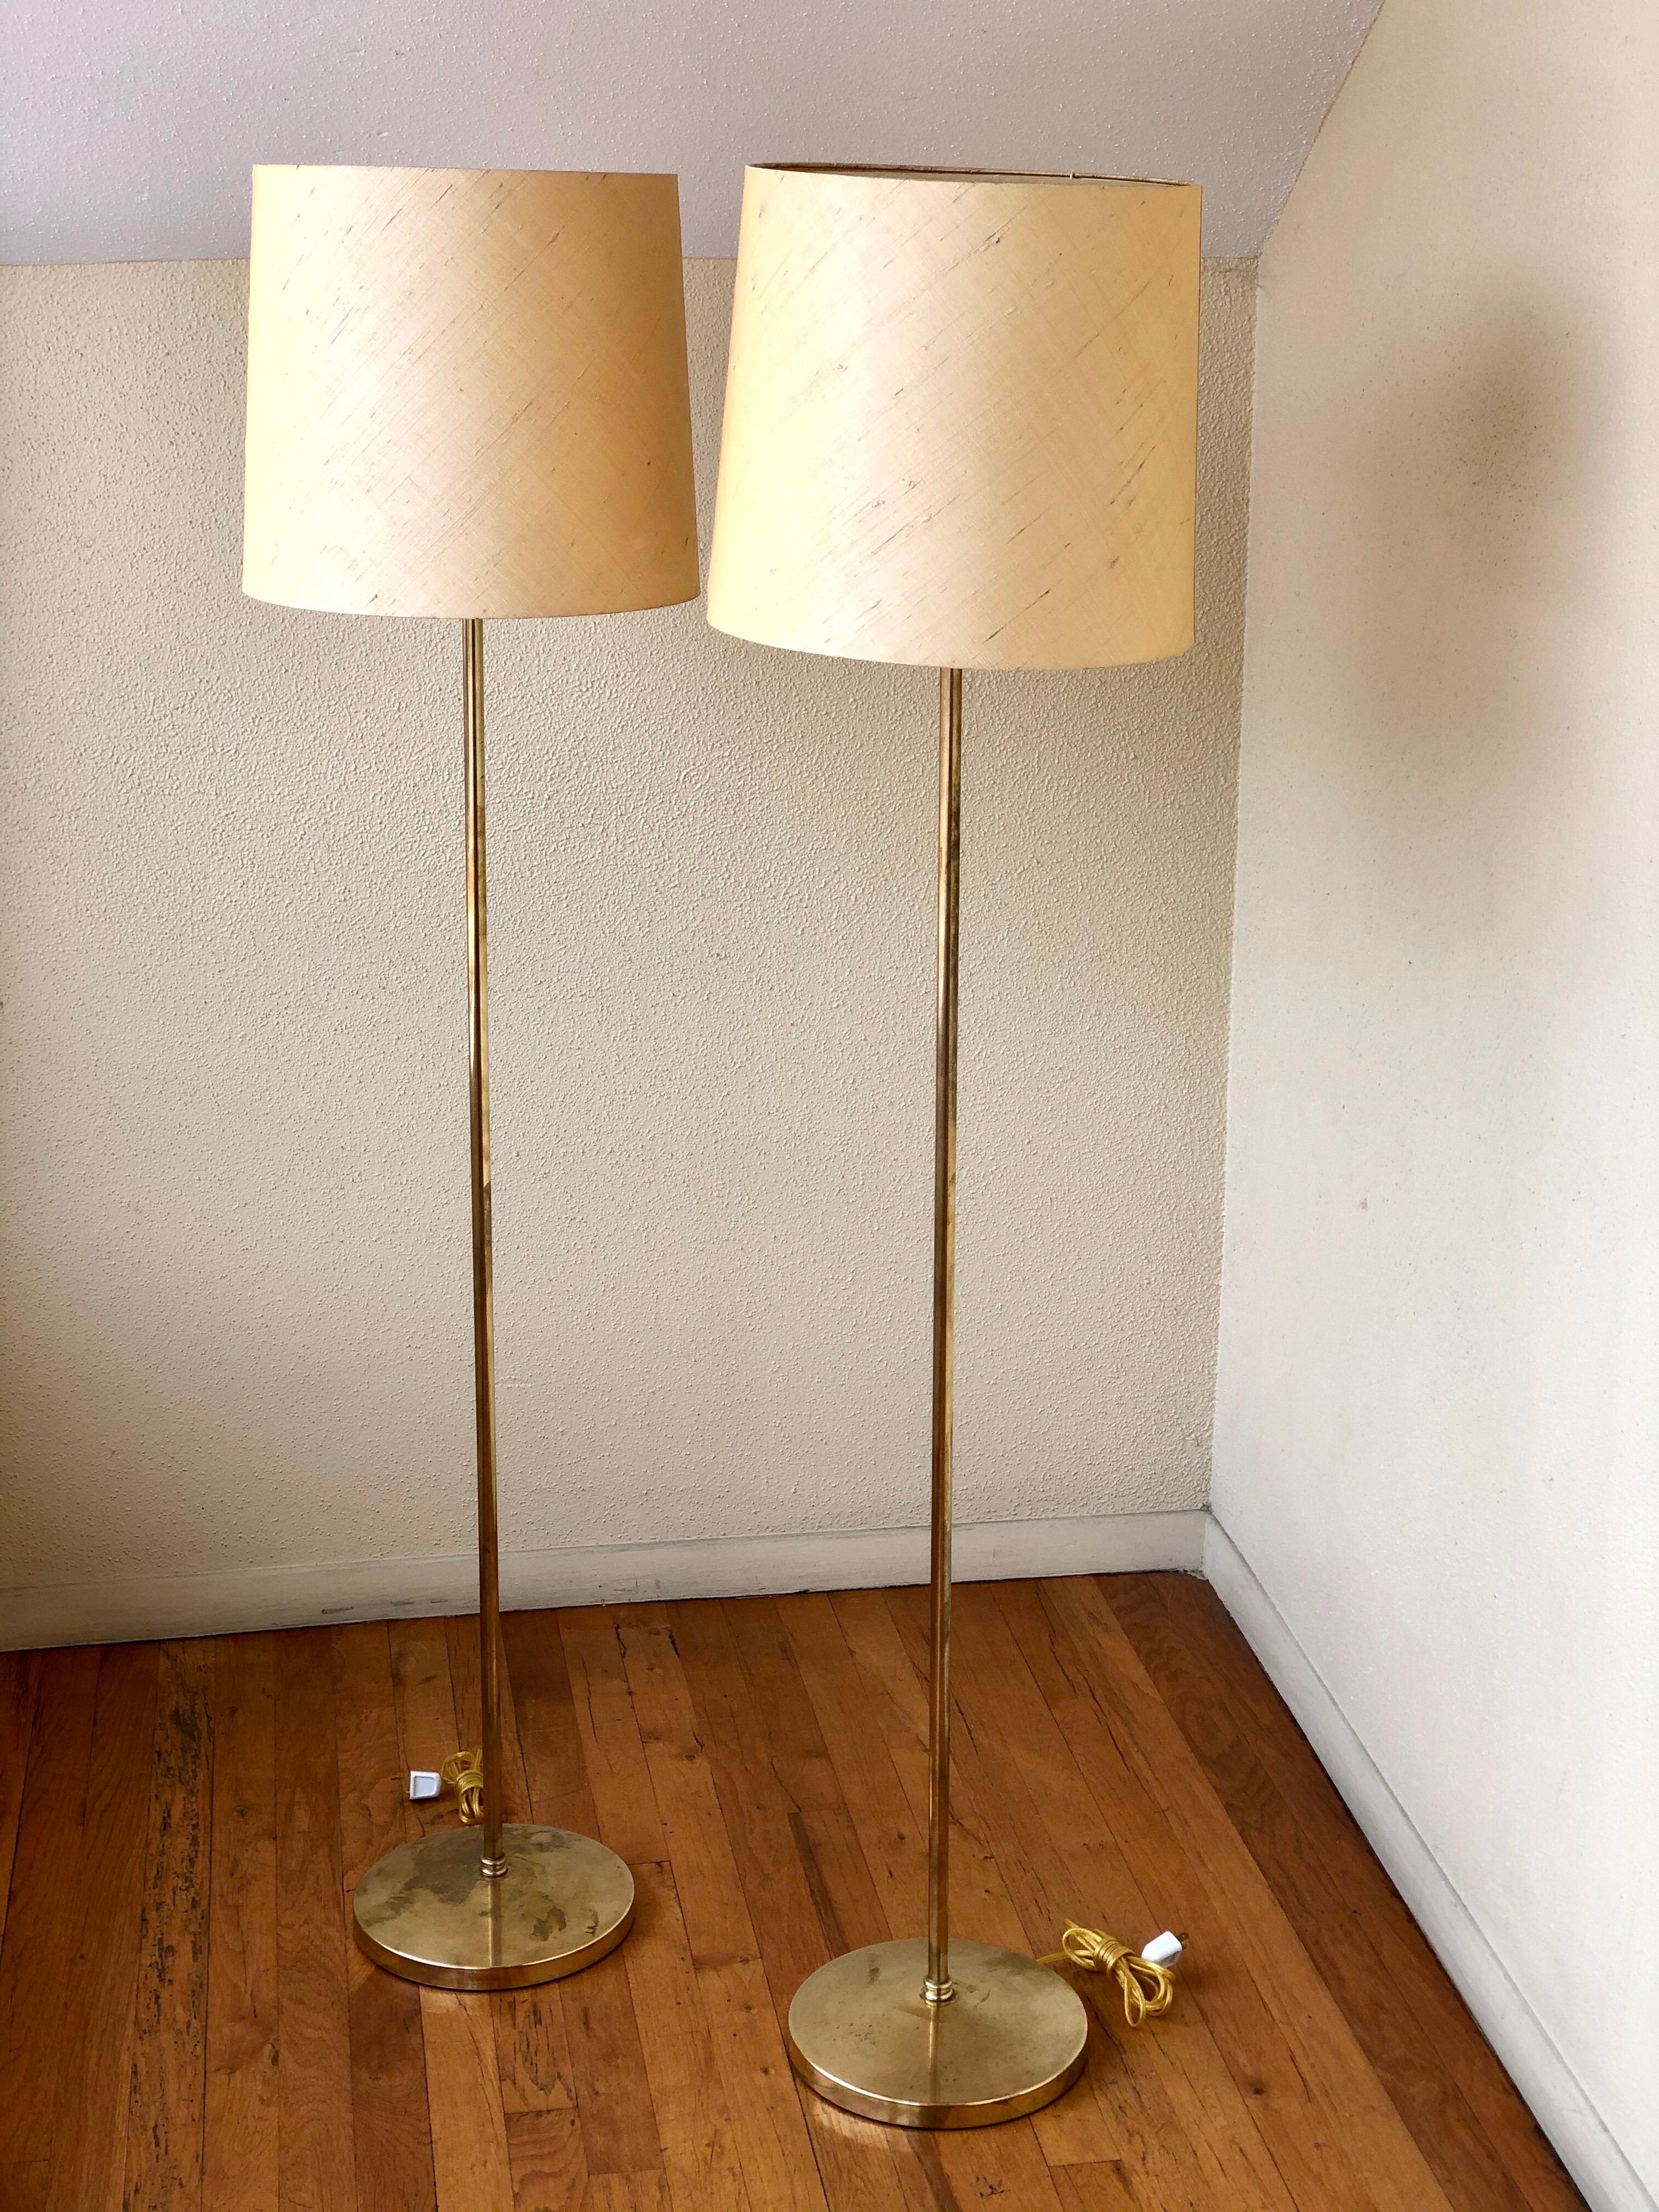 A very rare and hard to find pair of polished brass floor lamps, circa 1950s, we have the lamps rewired they do have their original lampshades one shade shows damage on the side as shown, but it’s the original lampshade, we are selling the pair in